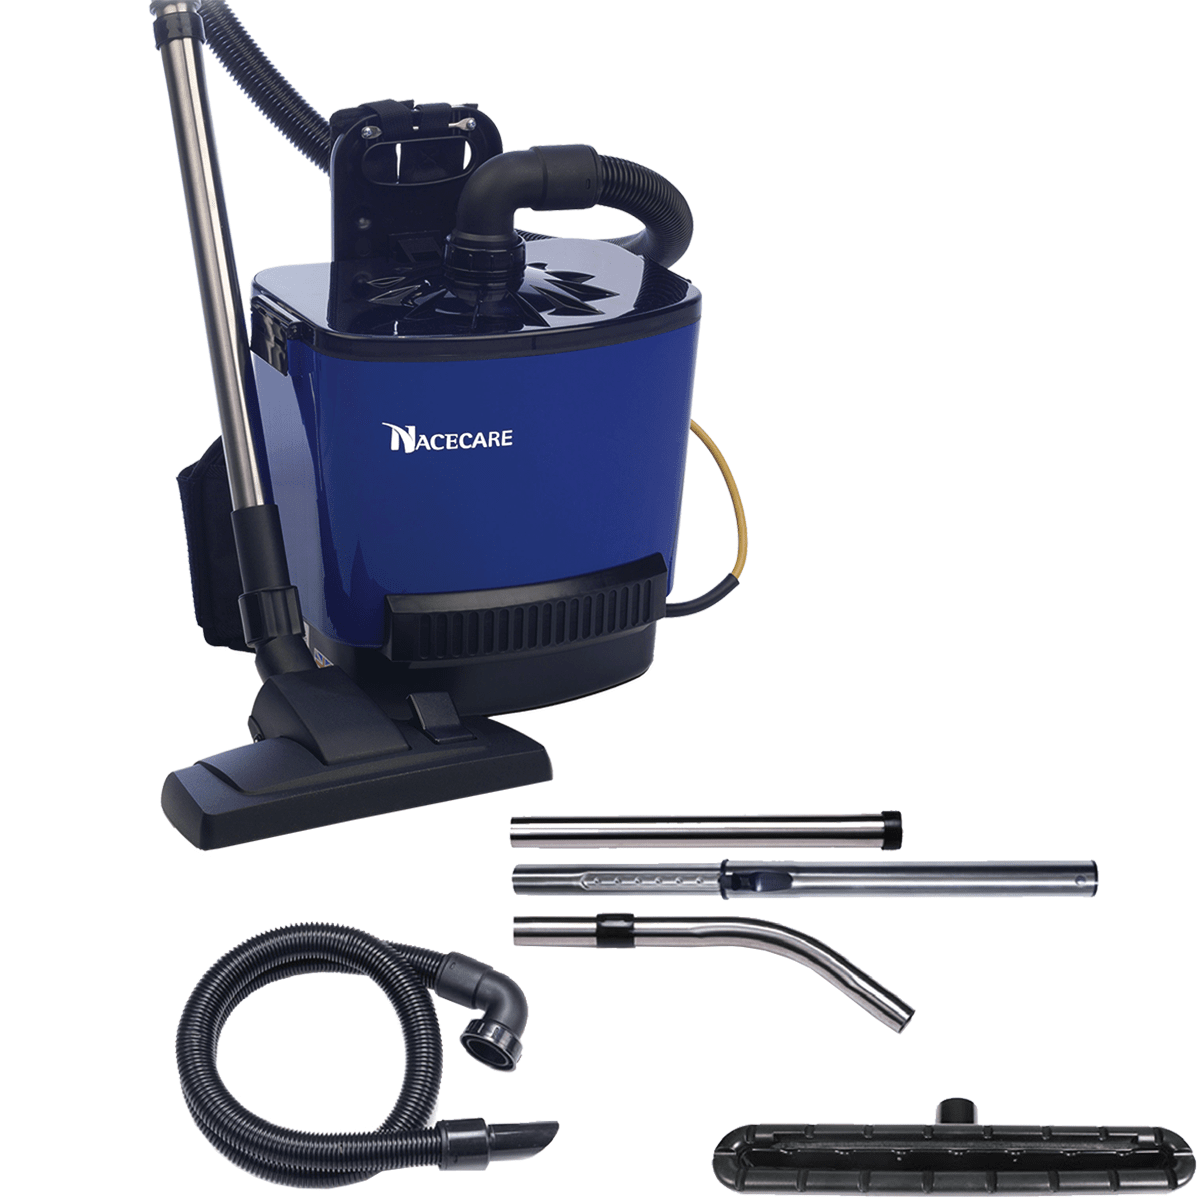 Nacecare Rsv 130 Backpack Vacuum With Productivity Kit - Astb4